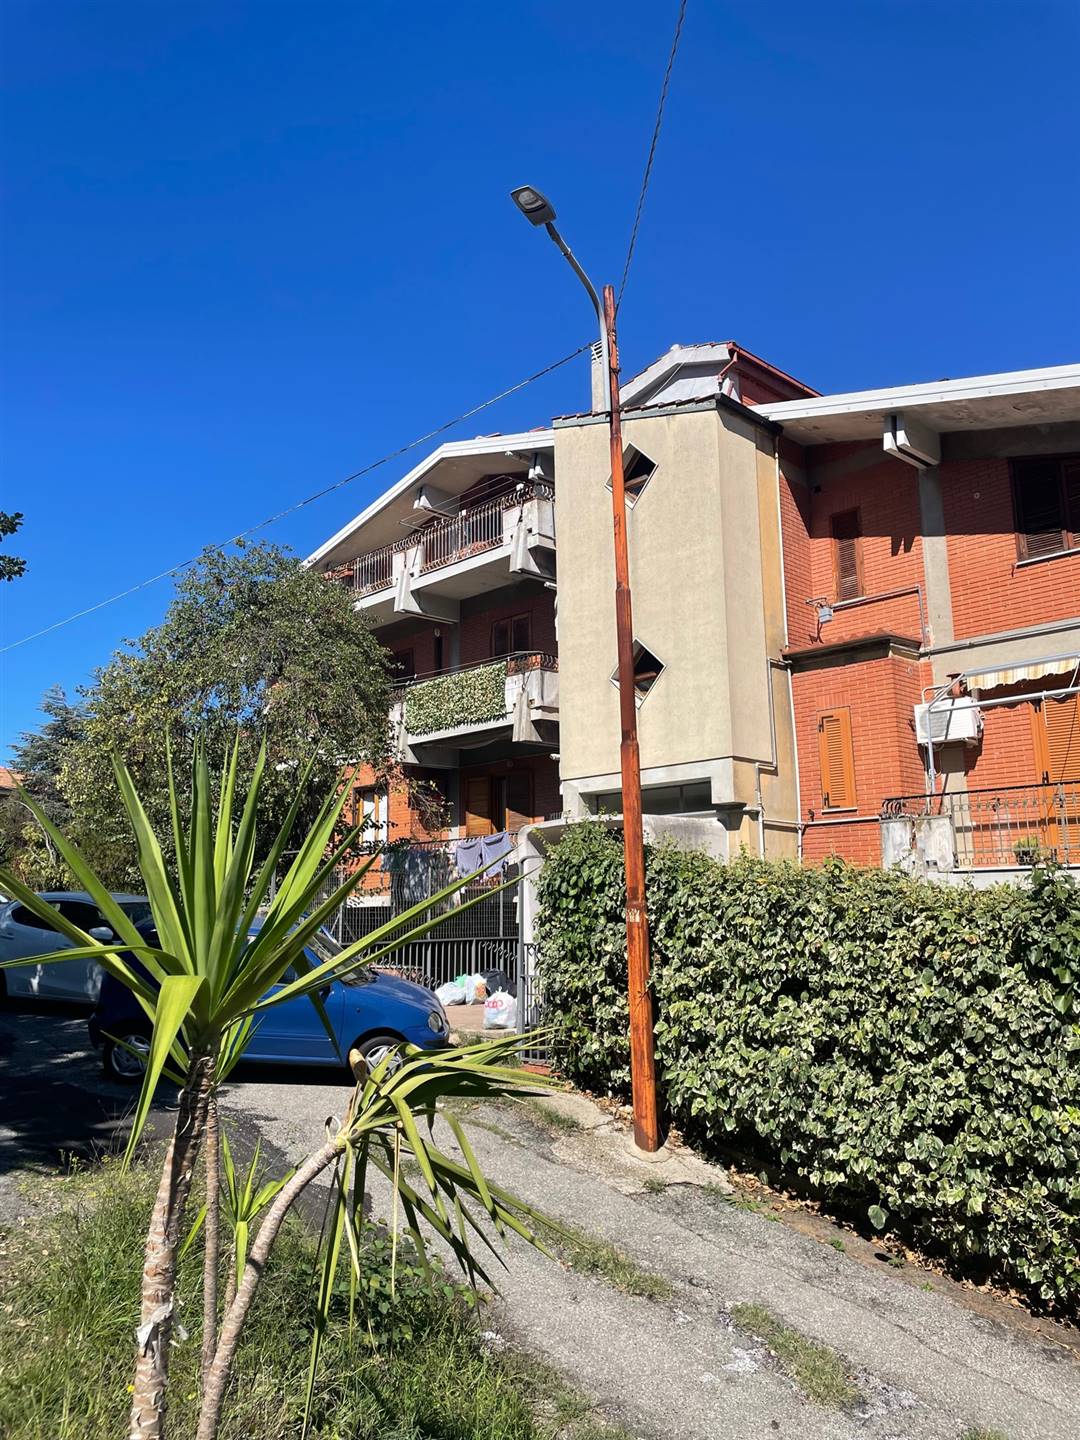 VADUE, CAROLEI, Apartment for sale of 172 Sq. mt., Be restored, Heating Individual heating system, Energetic class: G, placed at 2° on 3, composed 